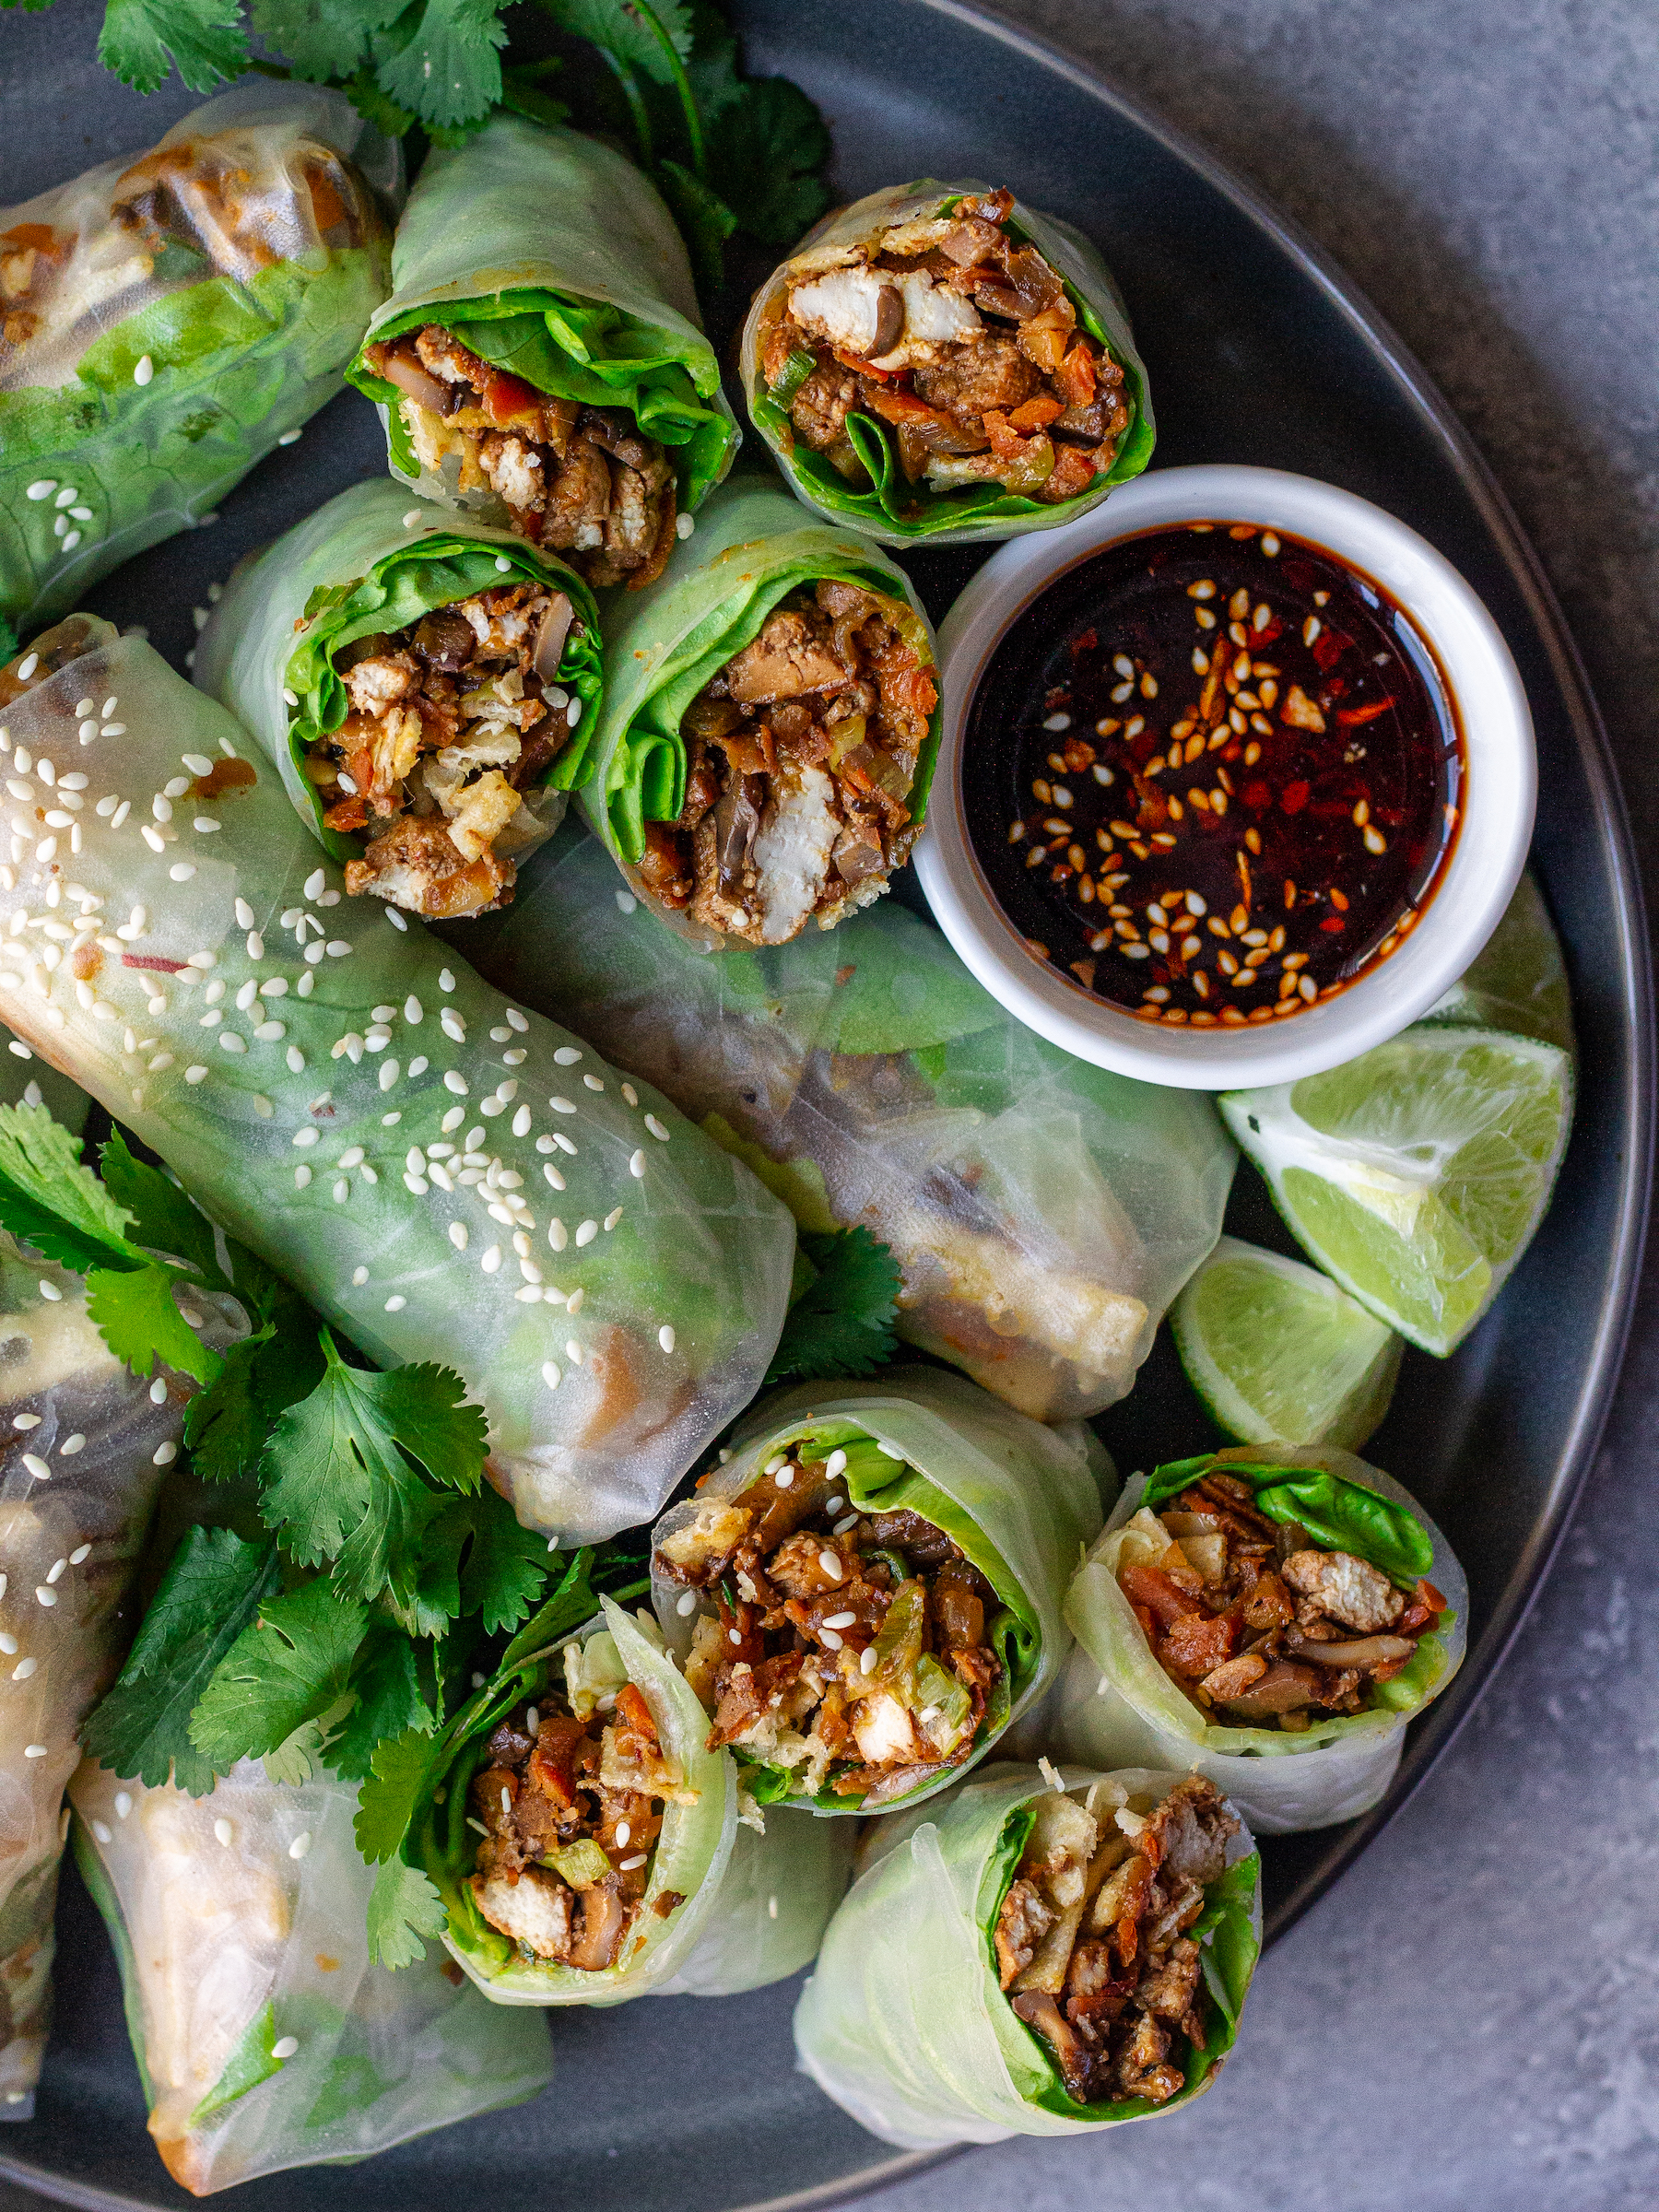 How to make rice paper rolls